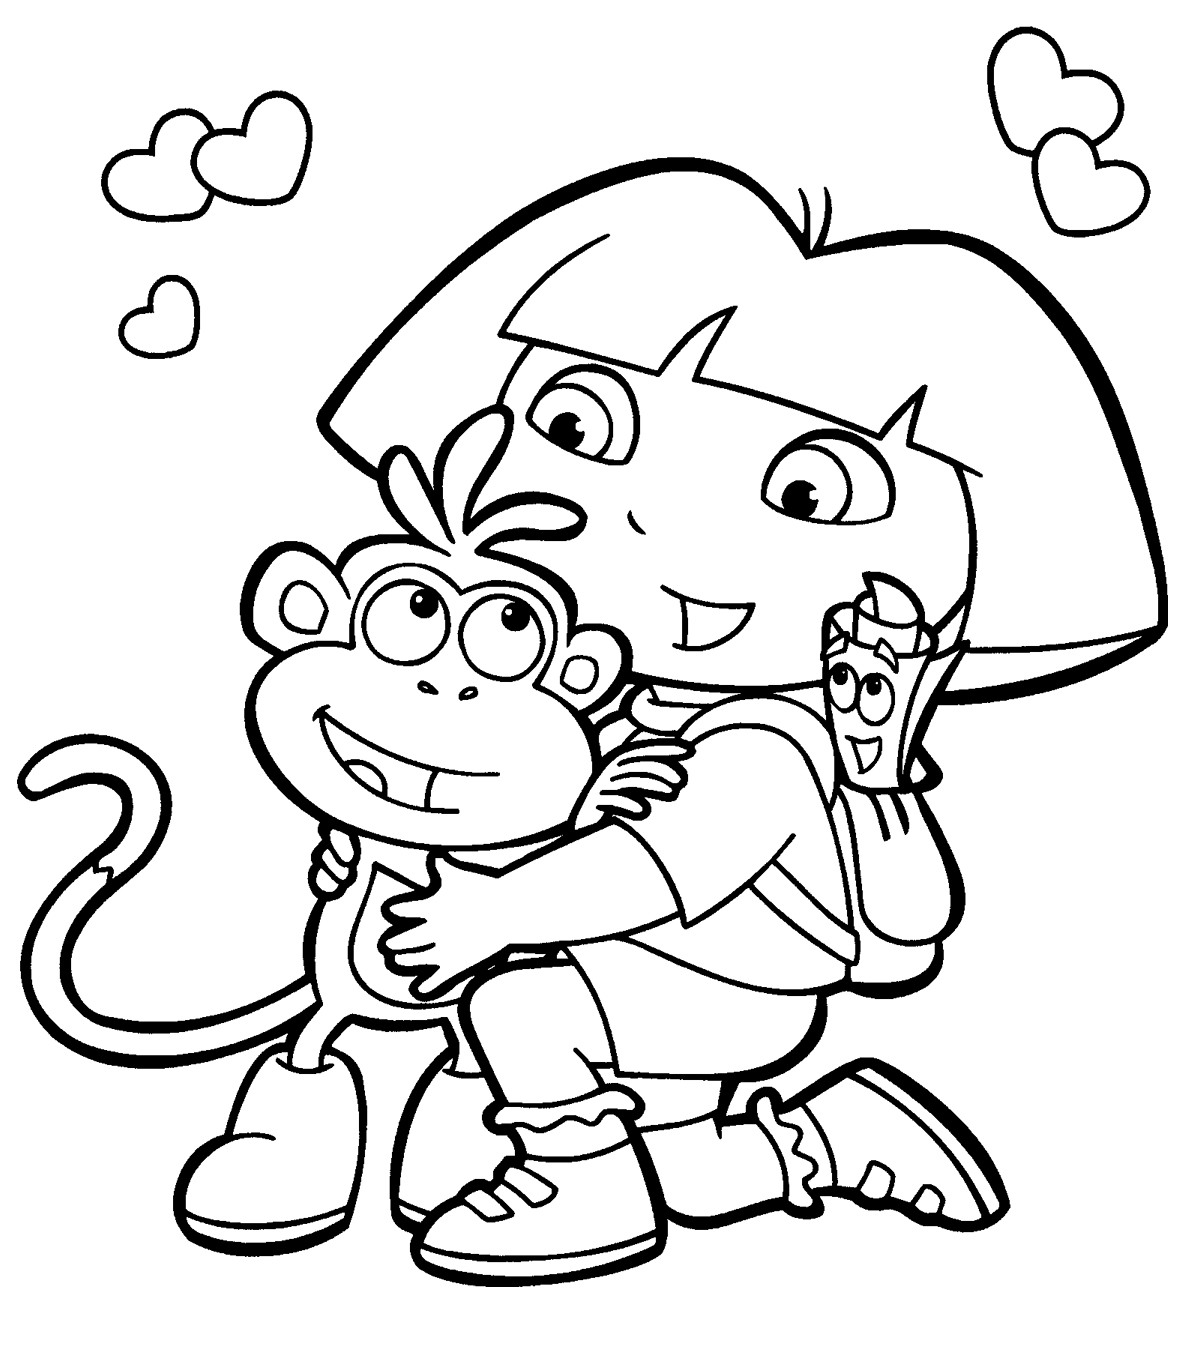 printable dora the explorer coloring pages dora the explorer coloring pages team colors the dora explorer coloring pages printable 